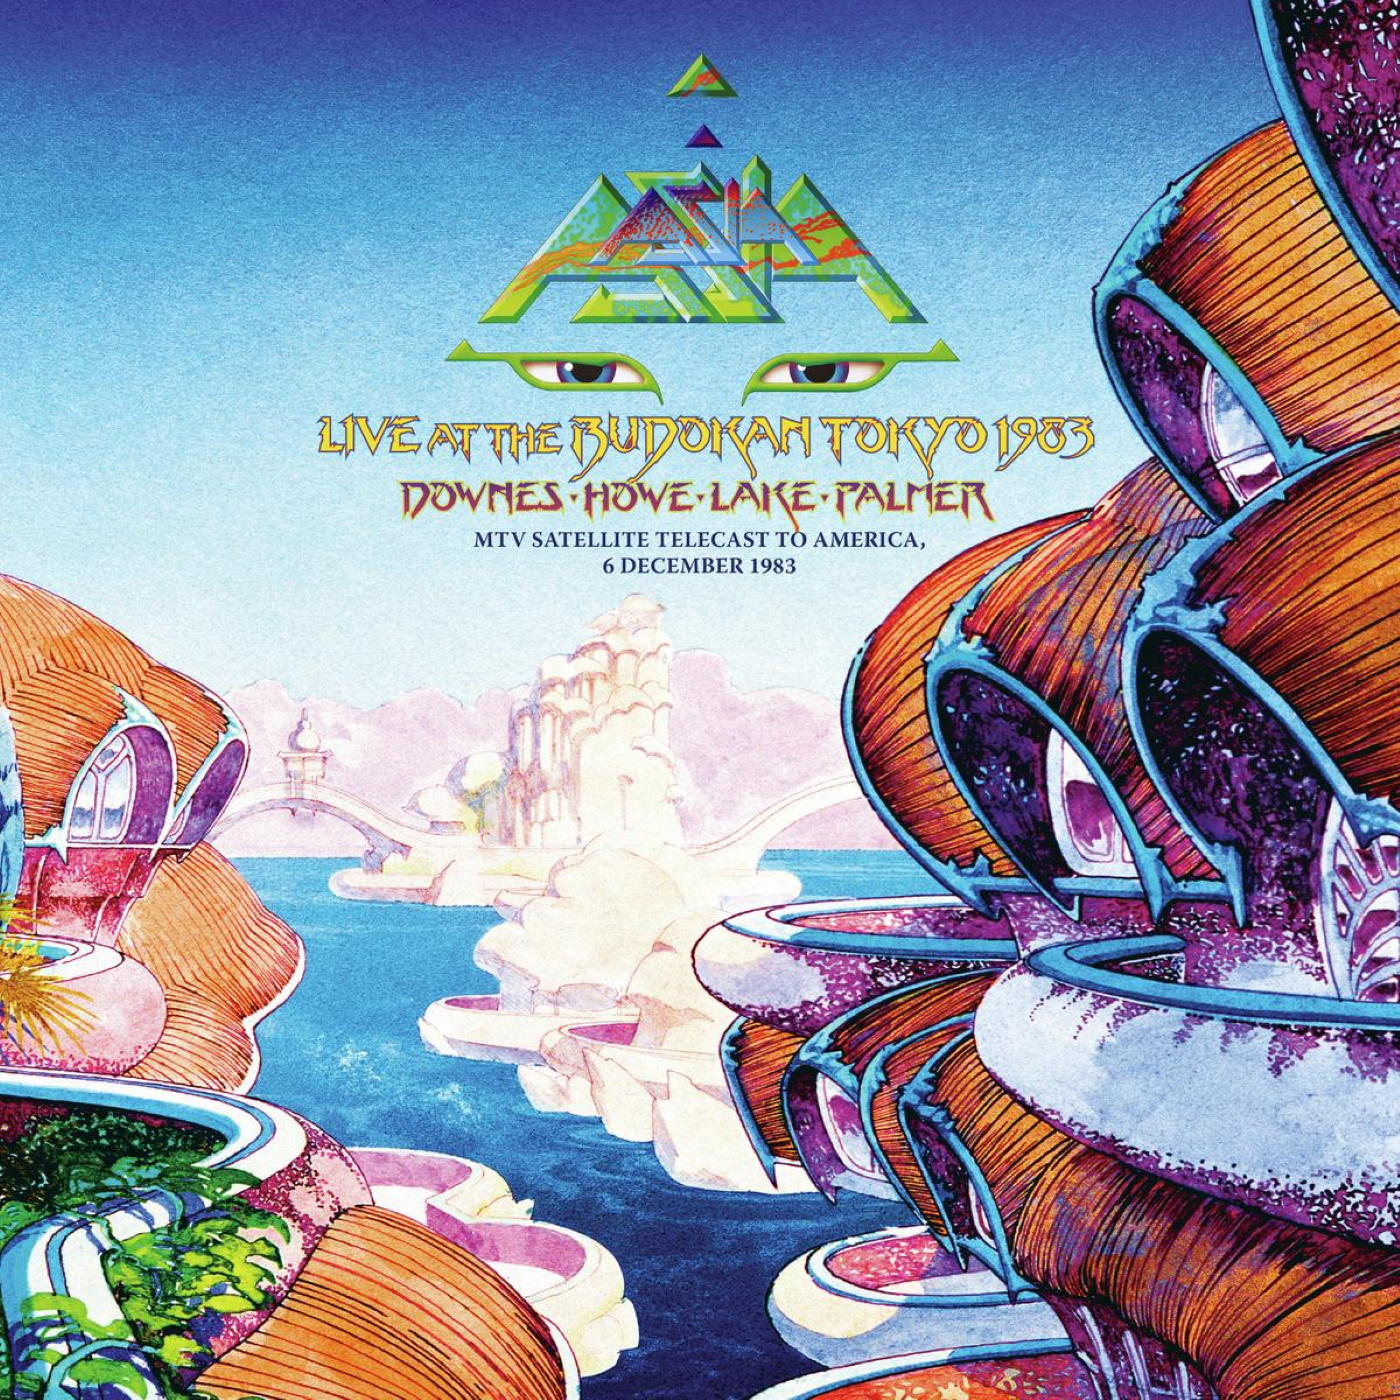 ASIA AT THE IN ASIA Asia - - (Blu-ray) TOKYO, BUDOKAN, - 1983 LIVE